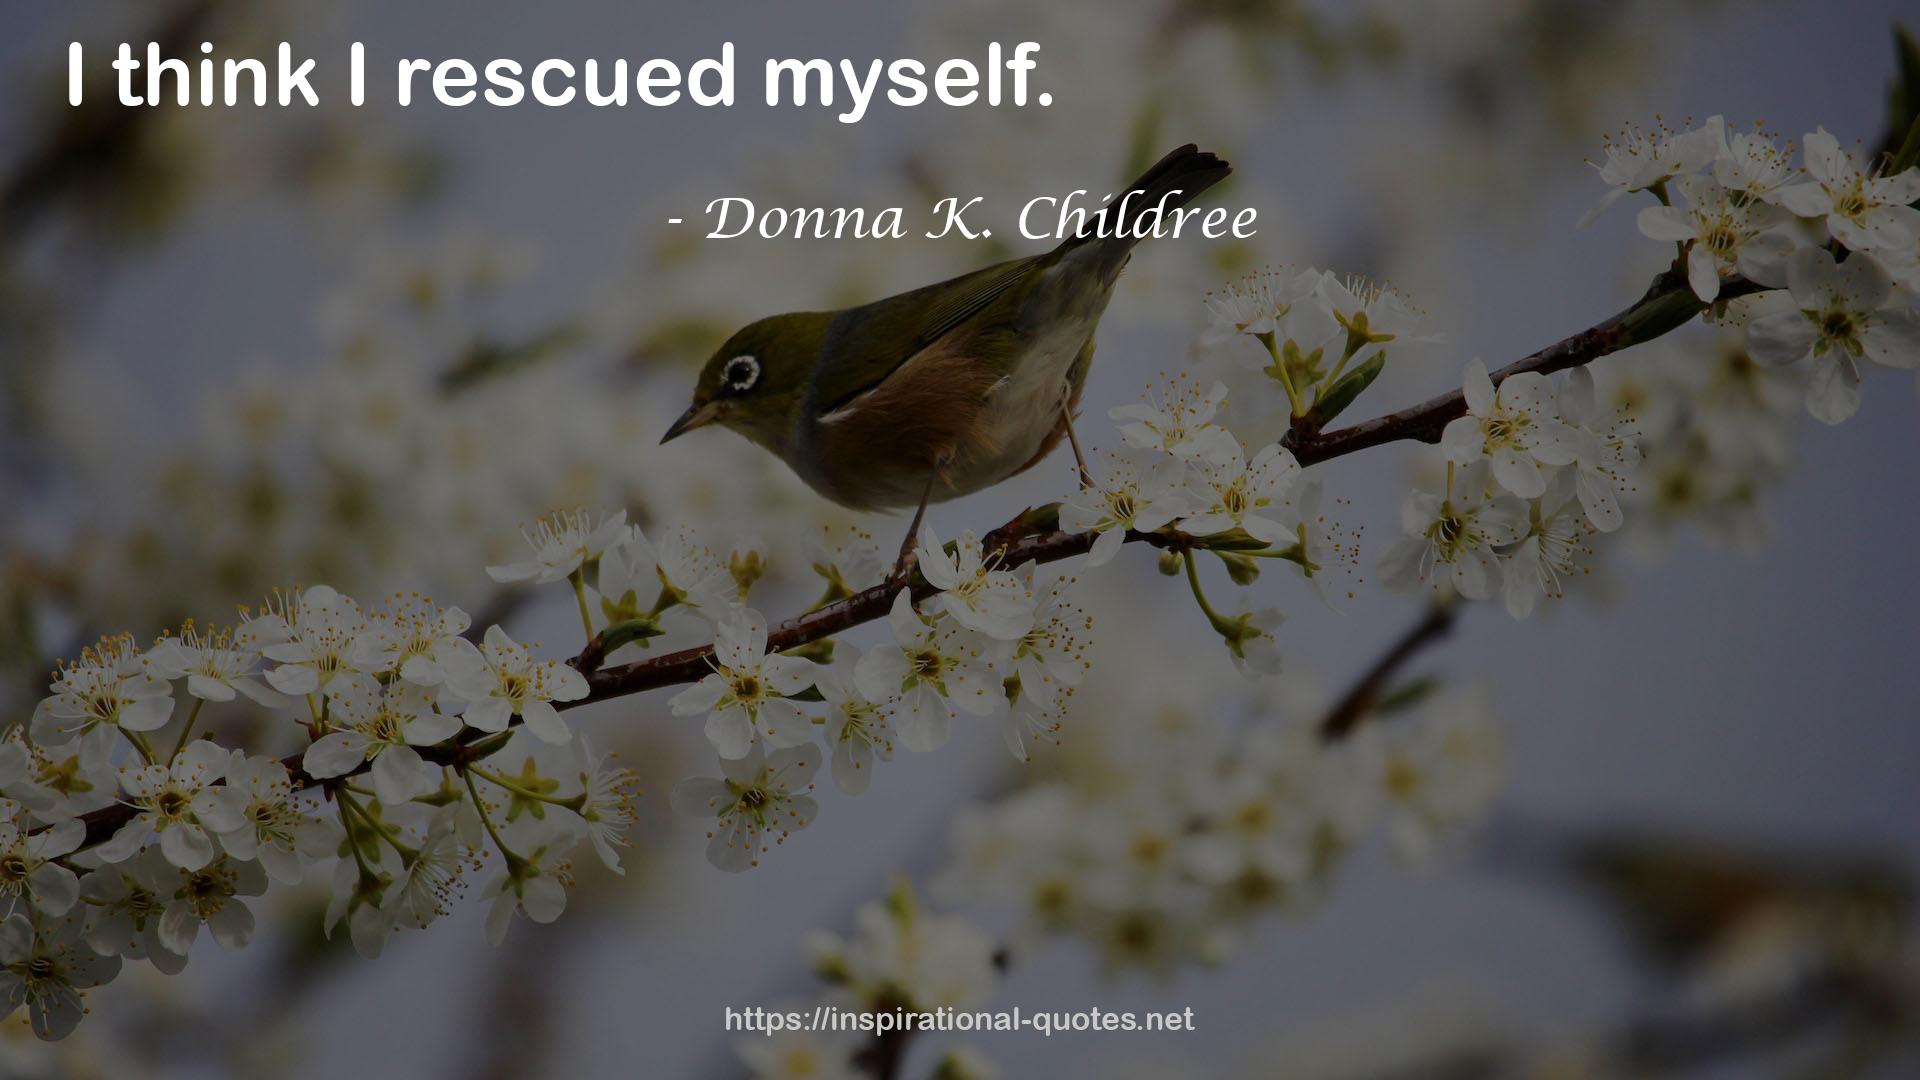 Donna K. Childree QUOTES